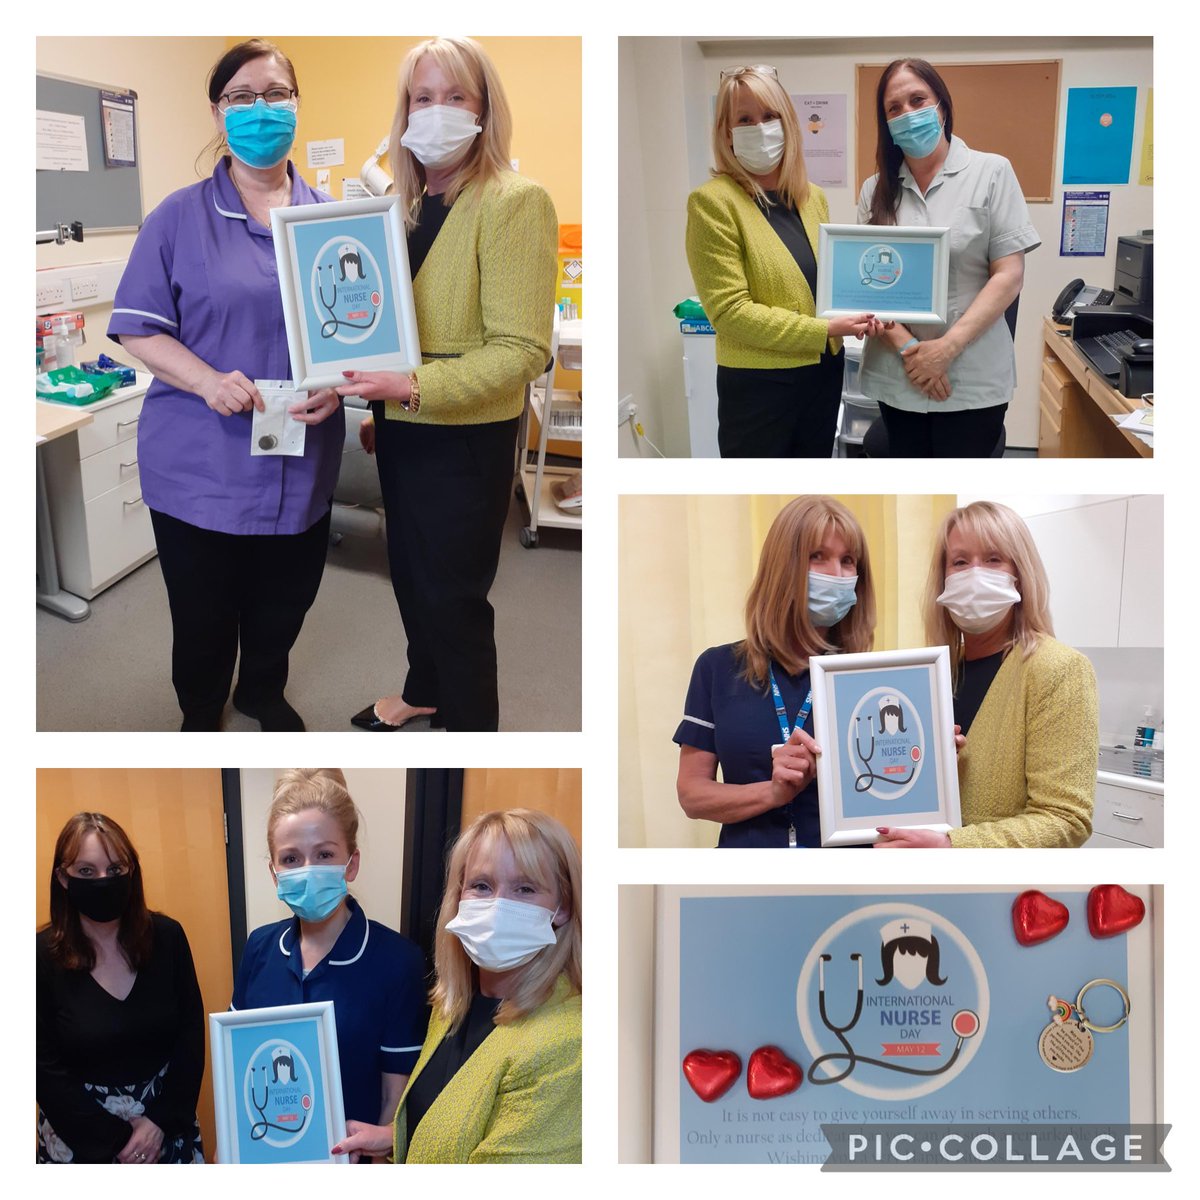 To celebrate #InternationalNursesDay key rings and chocolate hearts were presented to our fantastic nursing team who work in our Extended Access service. #BestOfNursing 💙